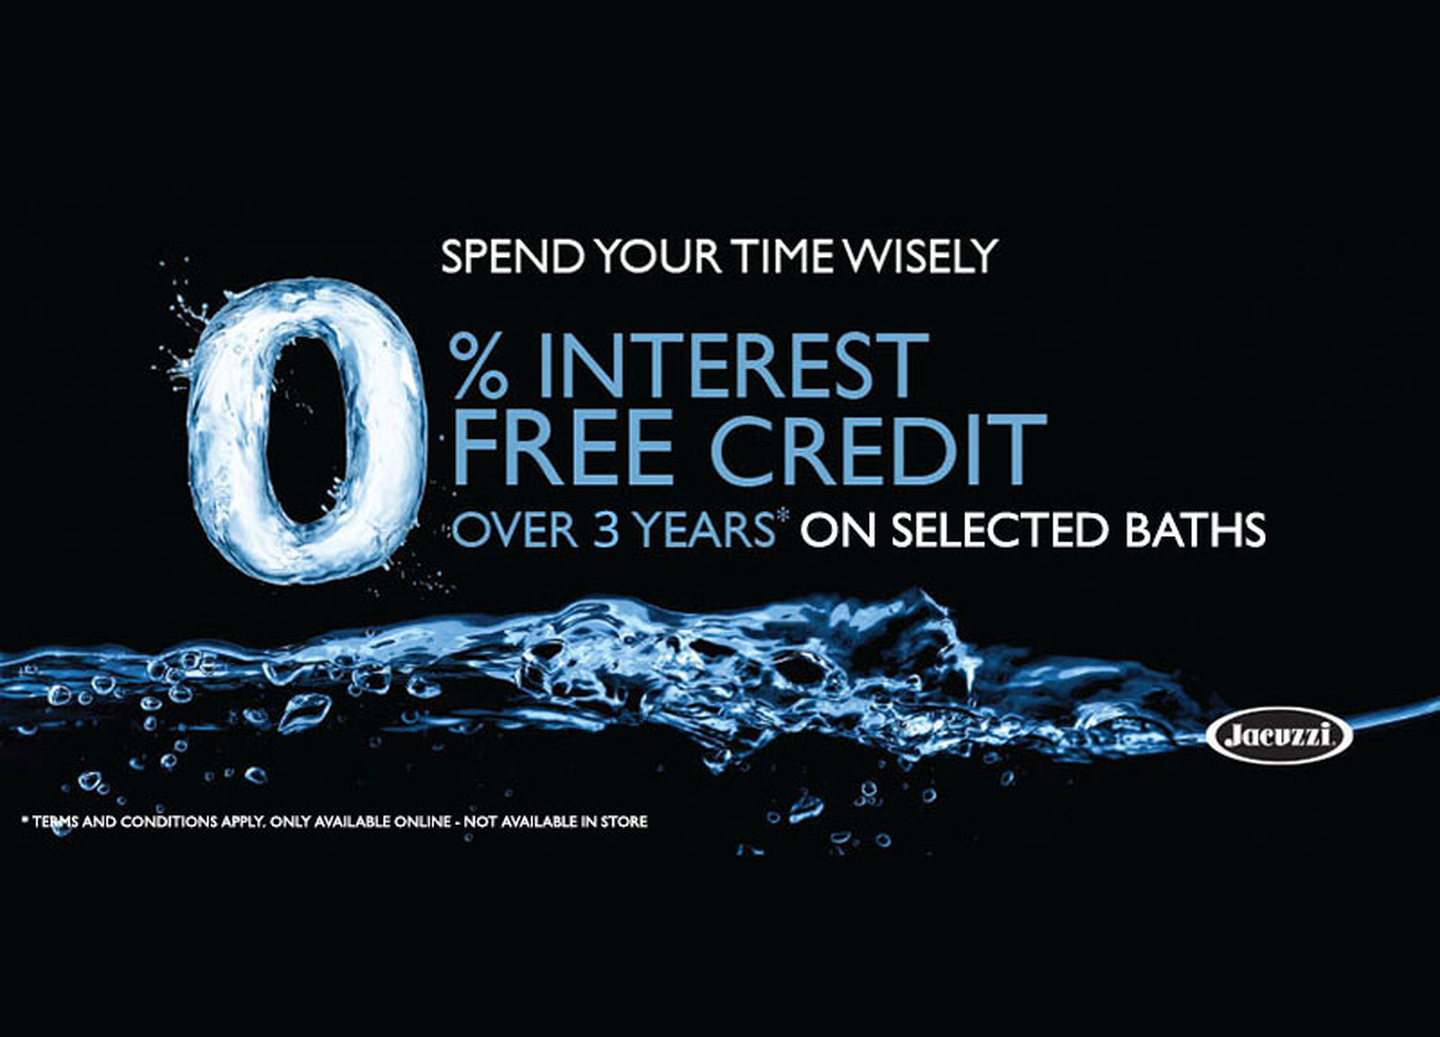 3 Years Interest Free Credit on Selected Baths